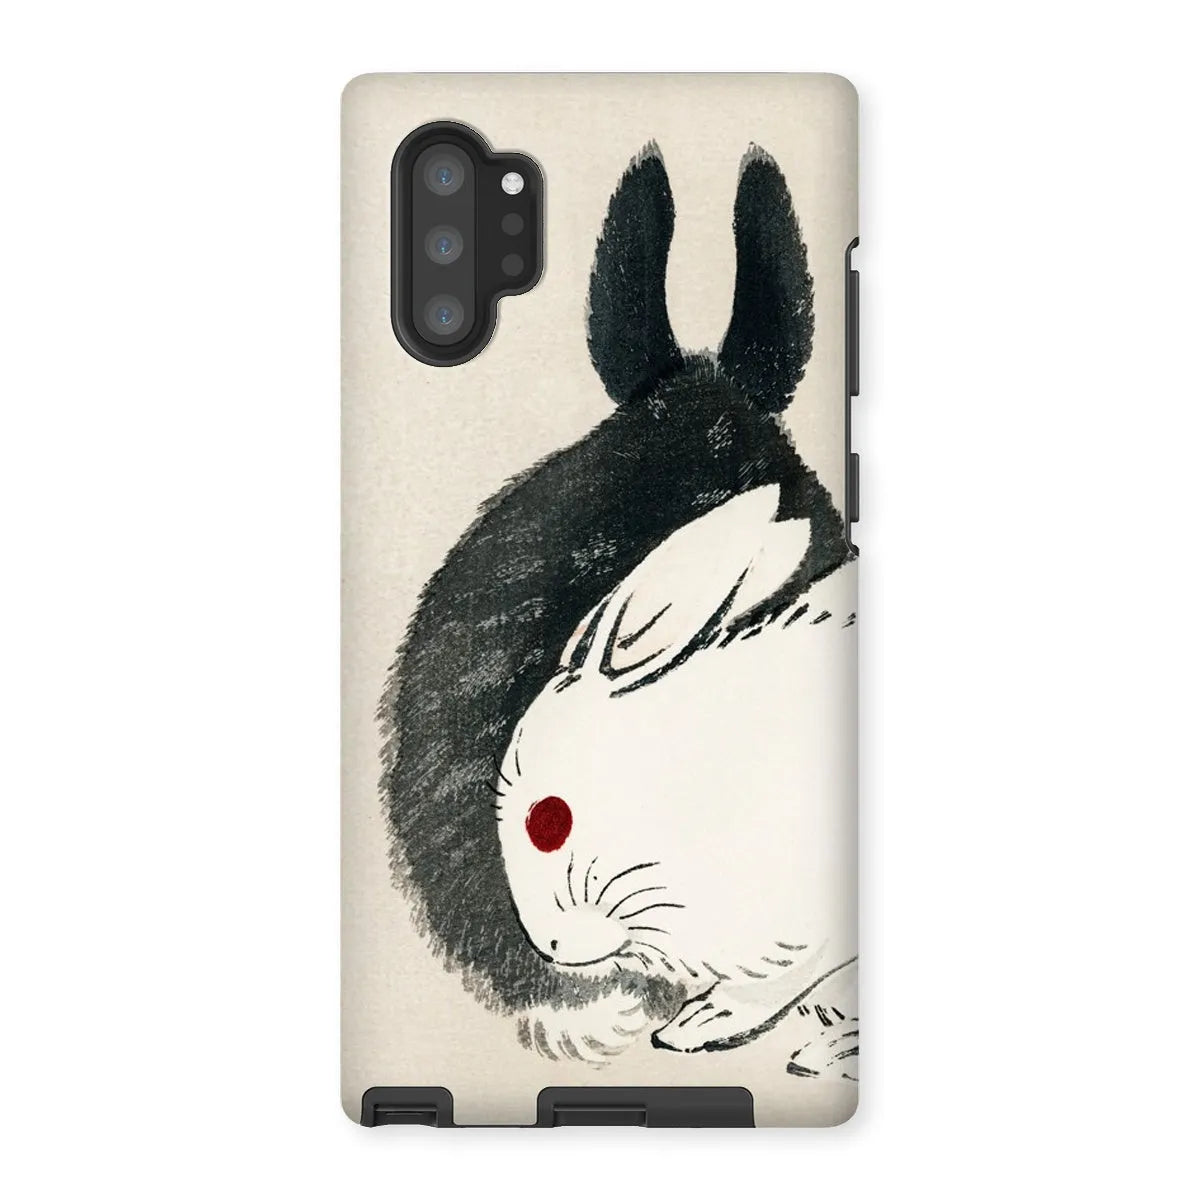 Rabbits - Black And White Meiji Art Phone Case - Kōno Bairei - Samsung Galaxy Note 10p / Matte - Mobile Phone Cases